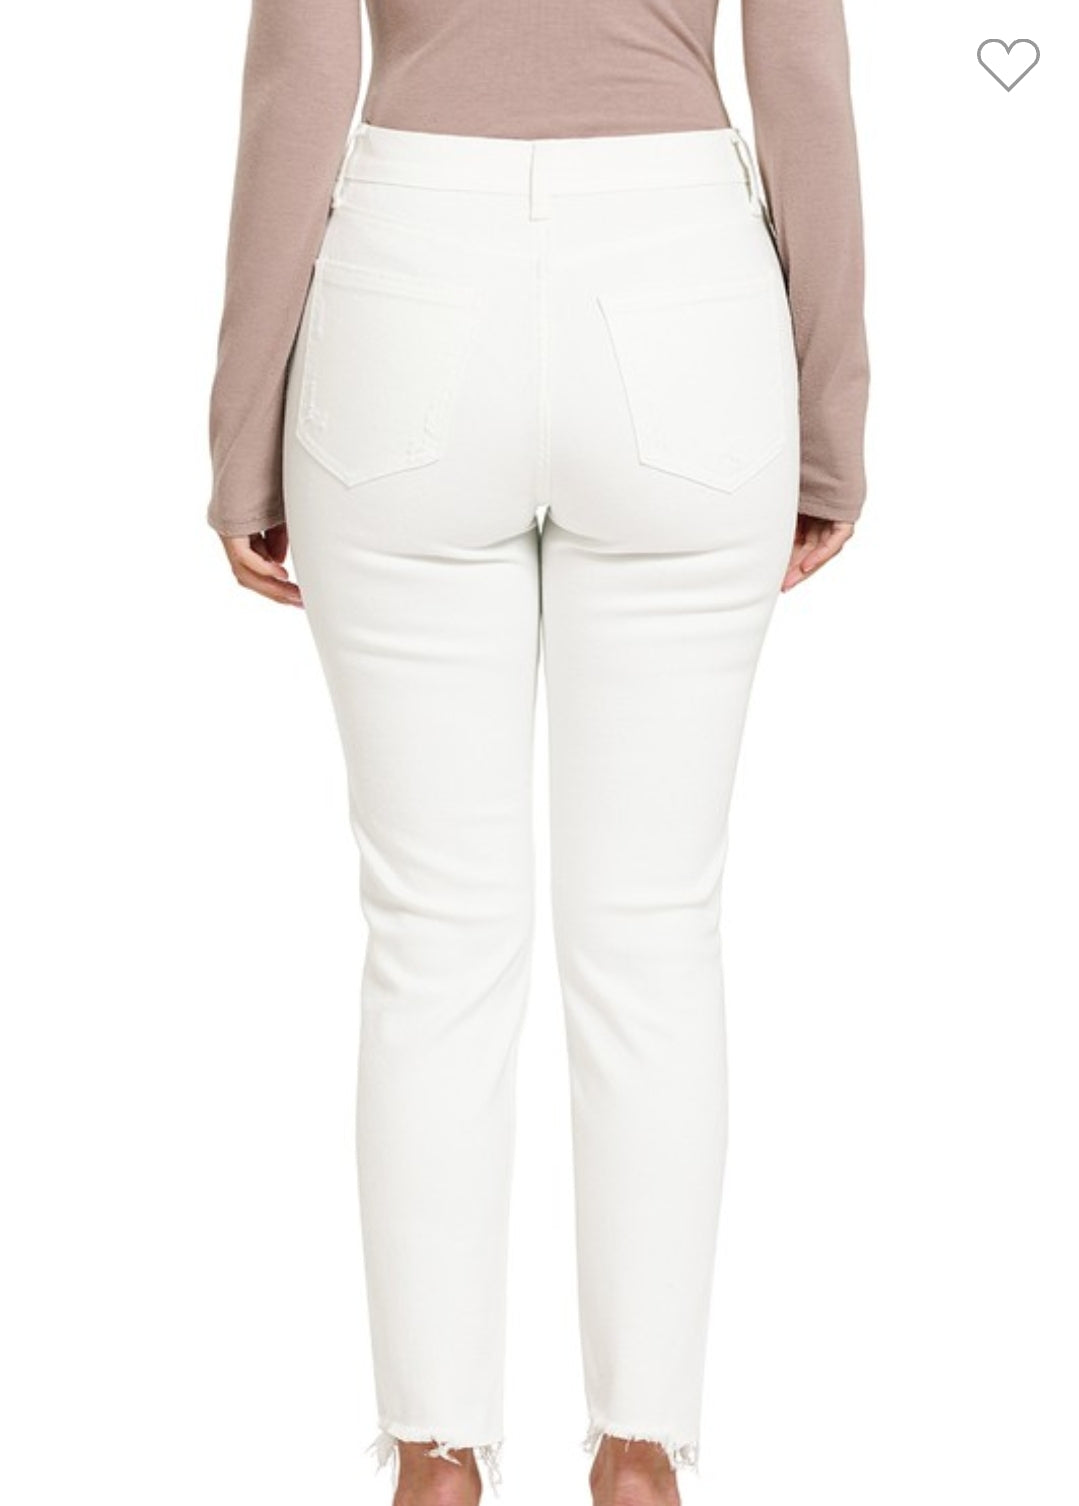 White Mid-Rise Distressed Button Fly Jeans * on sale